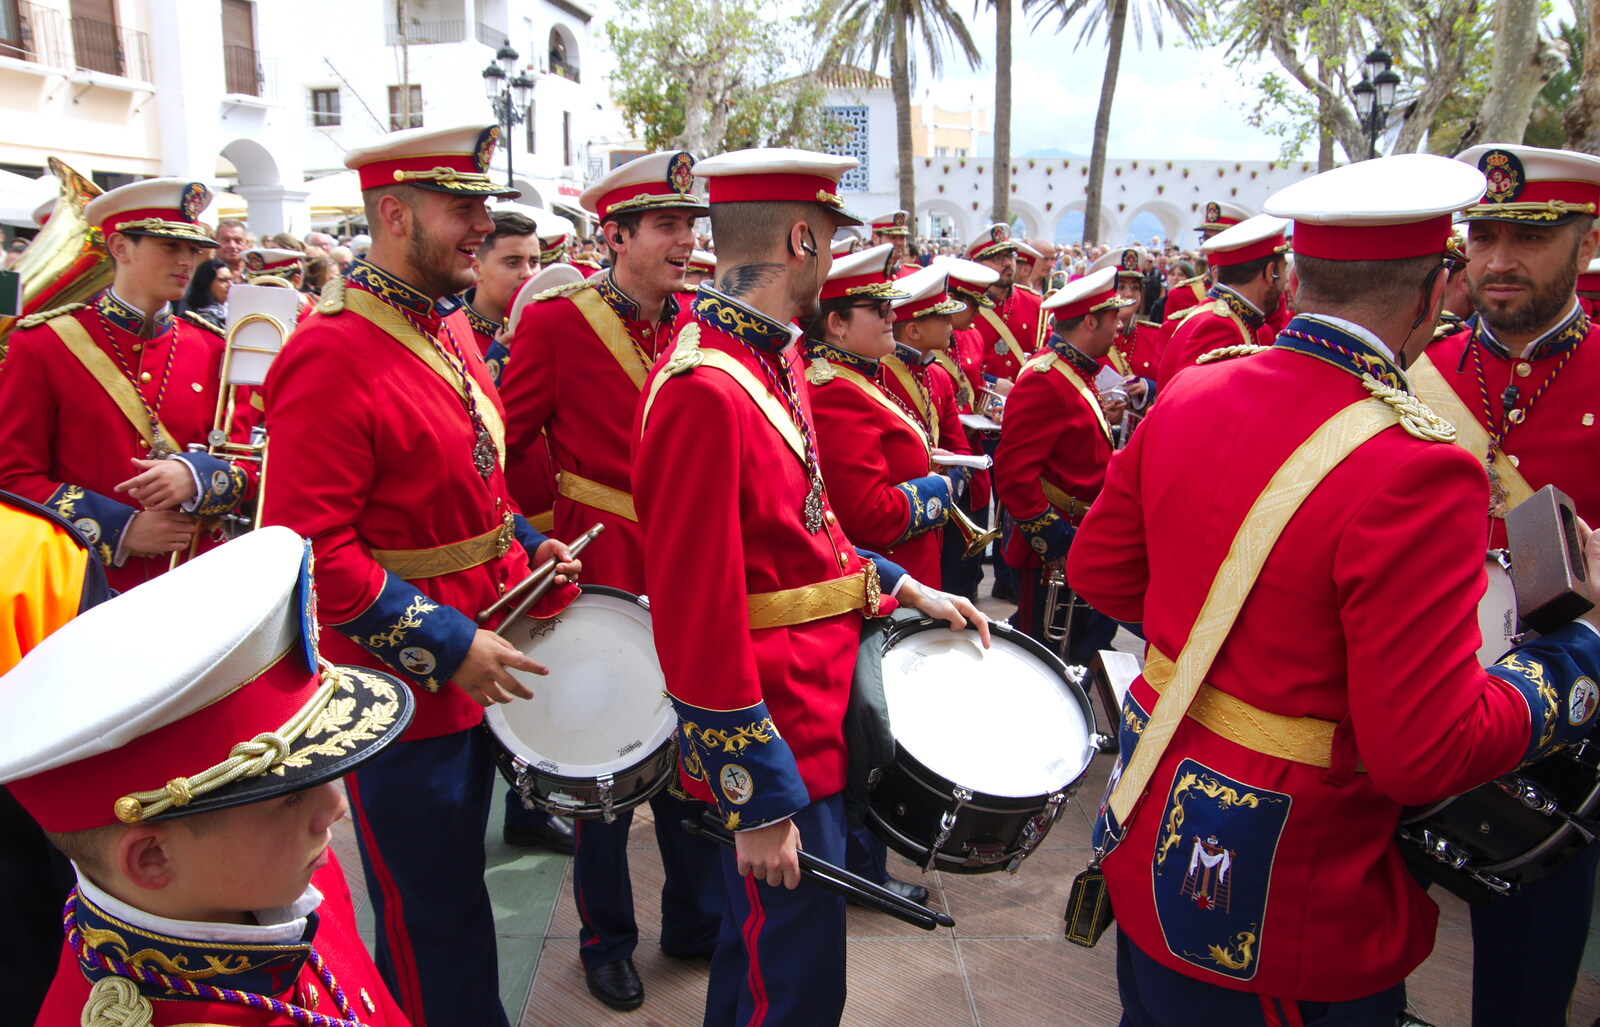 Side drummers from An Easter Parade, Nerja, Andalusia, Spain - 21st April 2019